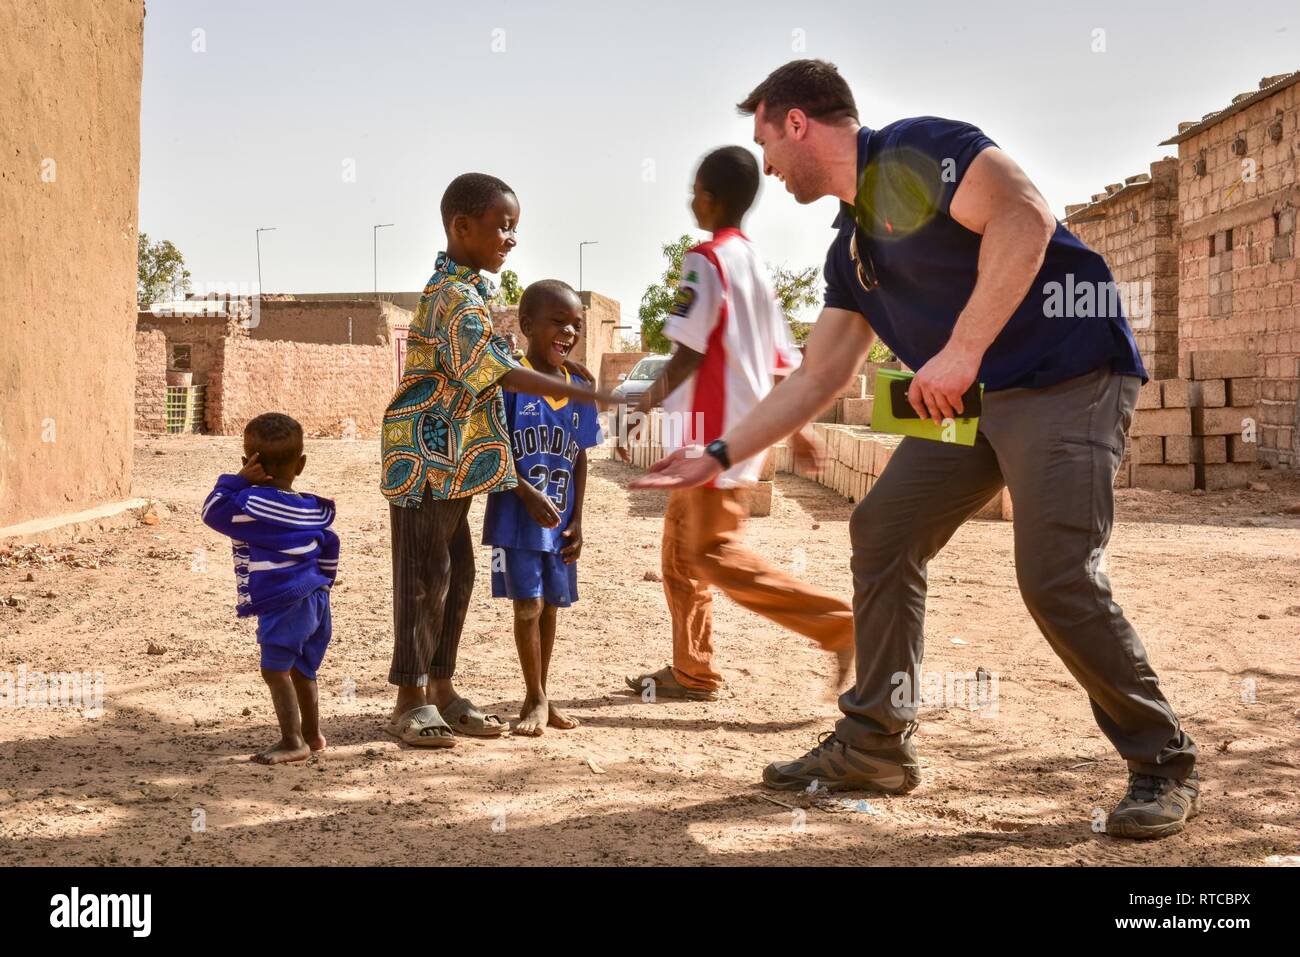 Local Burkinabe children give high fives with a U.S. Army Soldier assigned to the 122nd Civil Affairs Team during a site survey to evaluate a medical clinic in Loumbila, Burkina Faso, Feb. 13, 2019. Through key leader engagements, the Civil Affairs team works to further improve relations between the local national populous and U.S. forces during exercise Flintlock 2019. Stock Photo